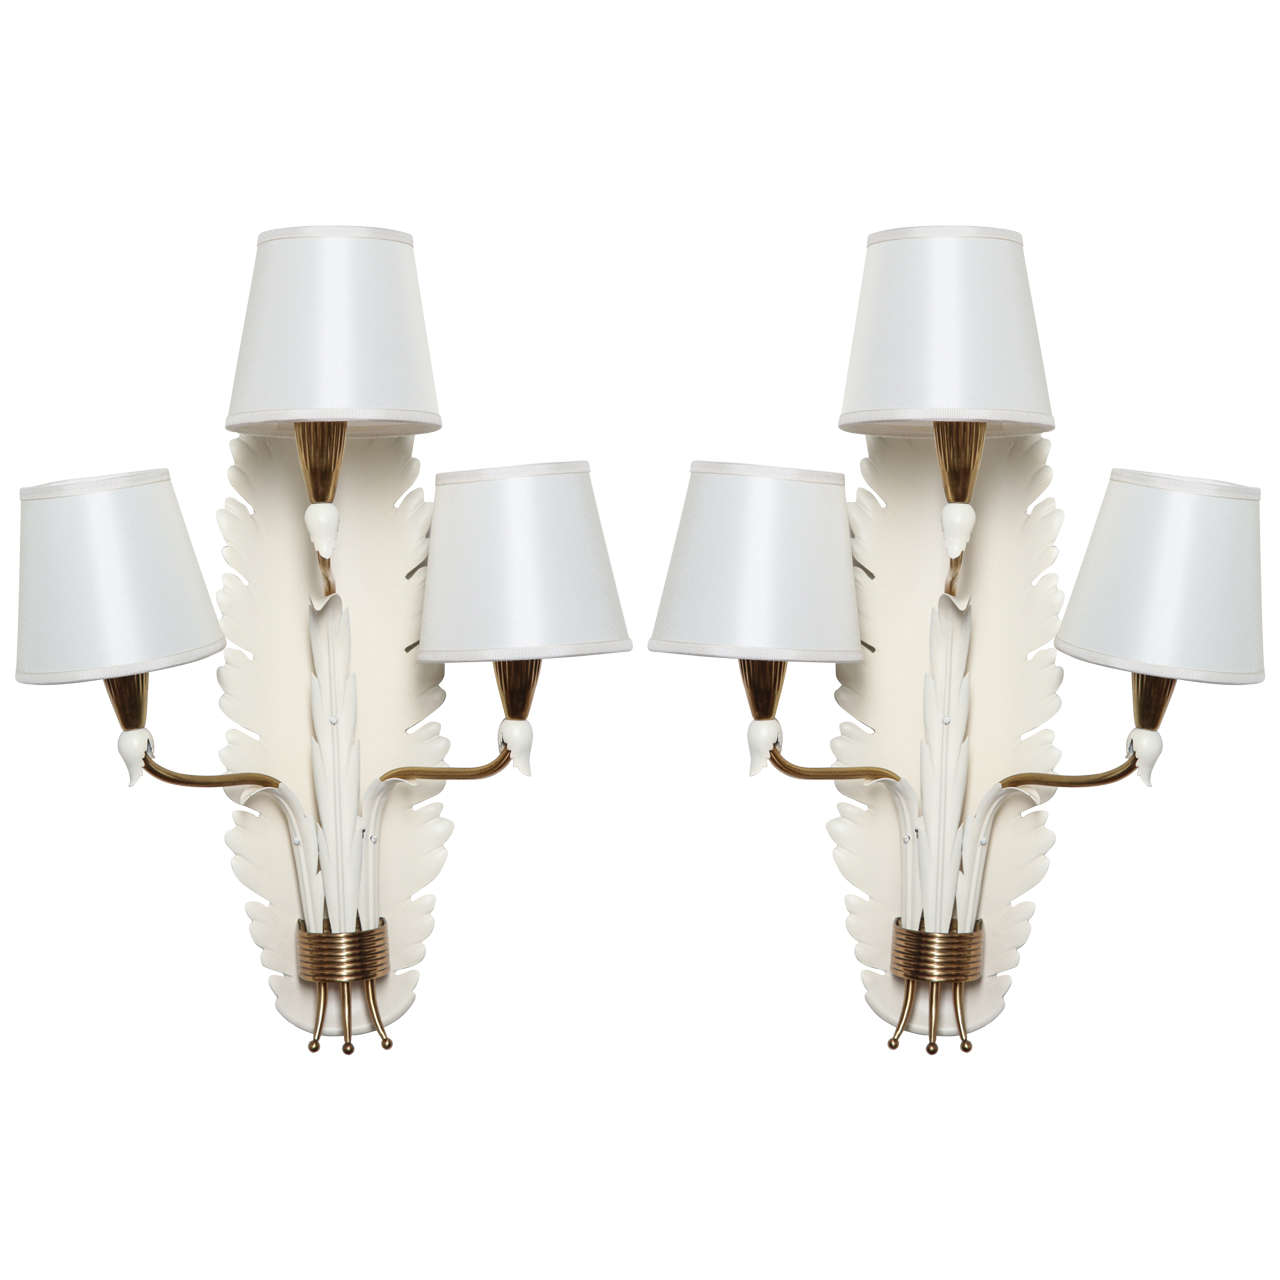 Arteluce Sconces Designed by Gino Sarfatti Made in Italy For Sale